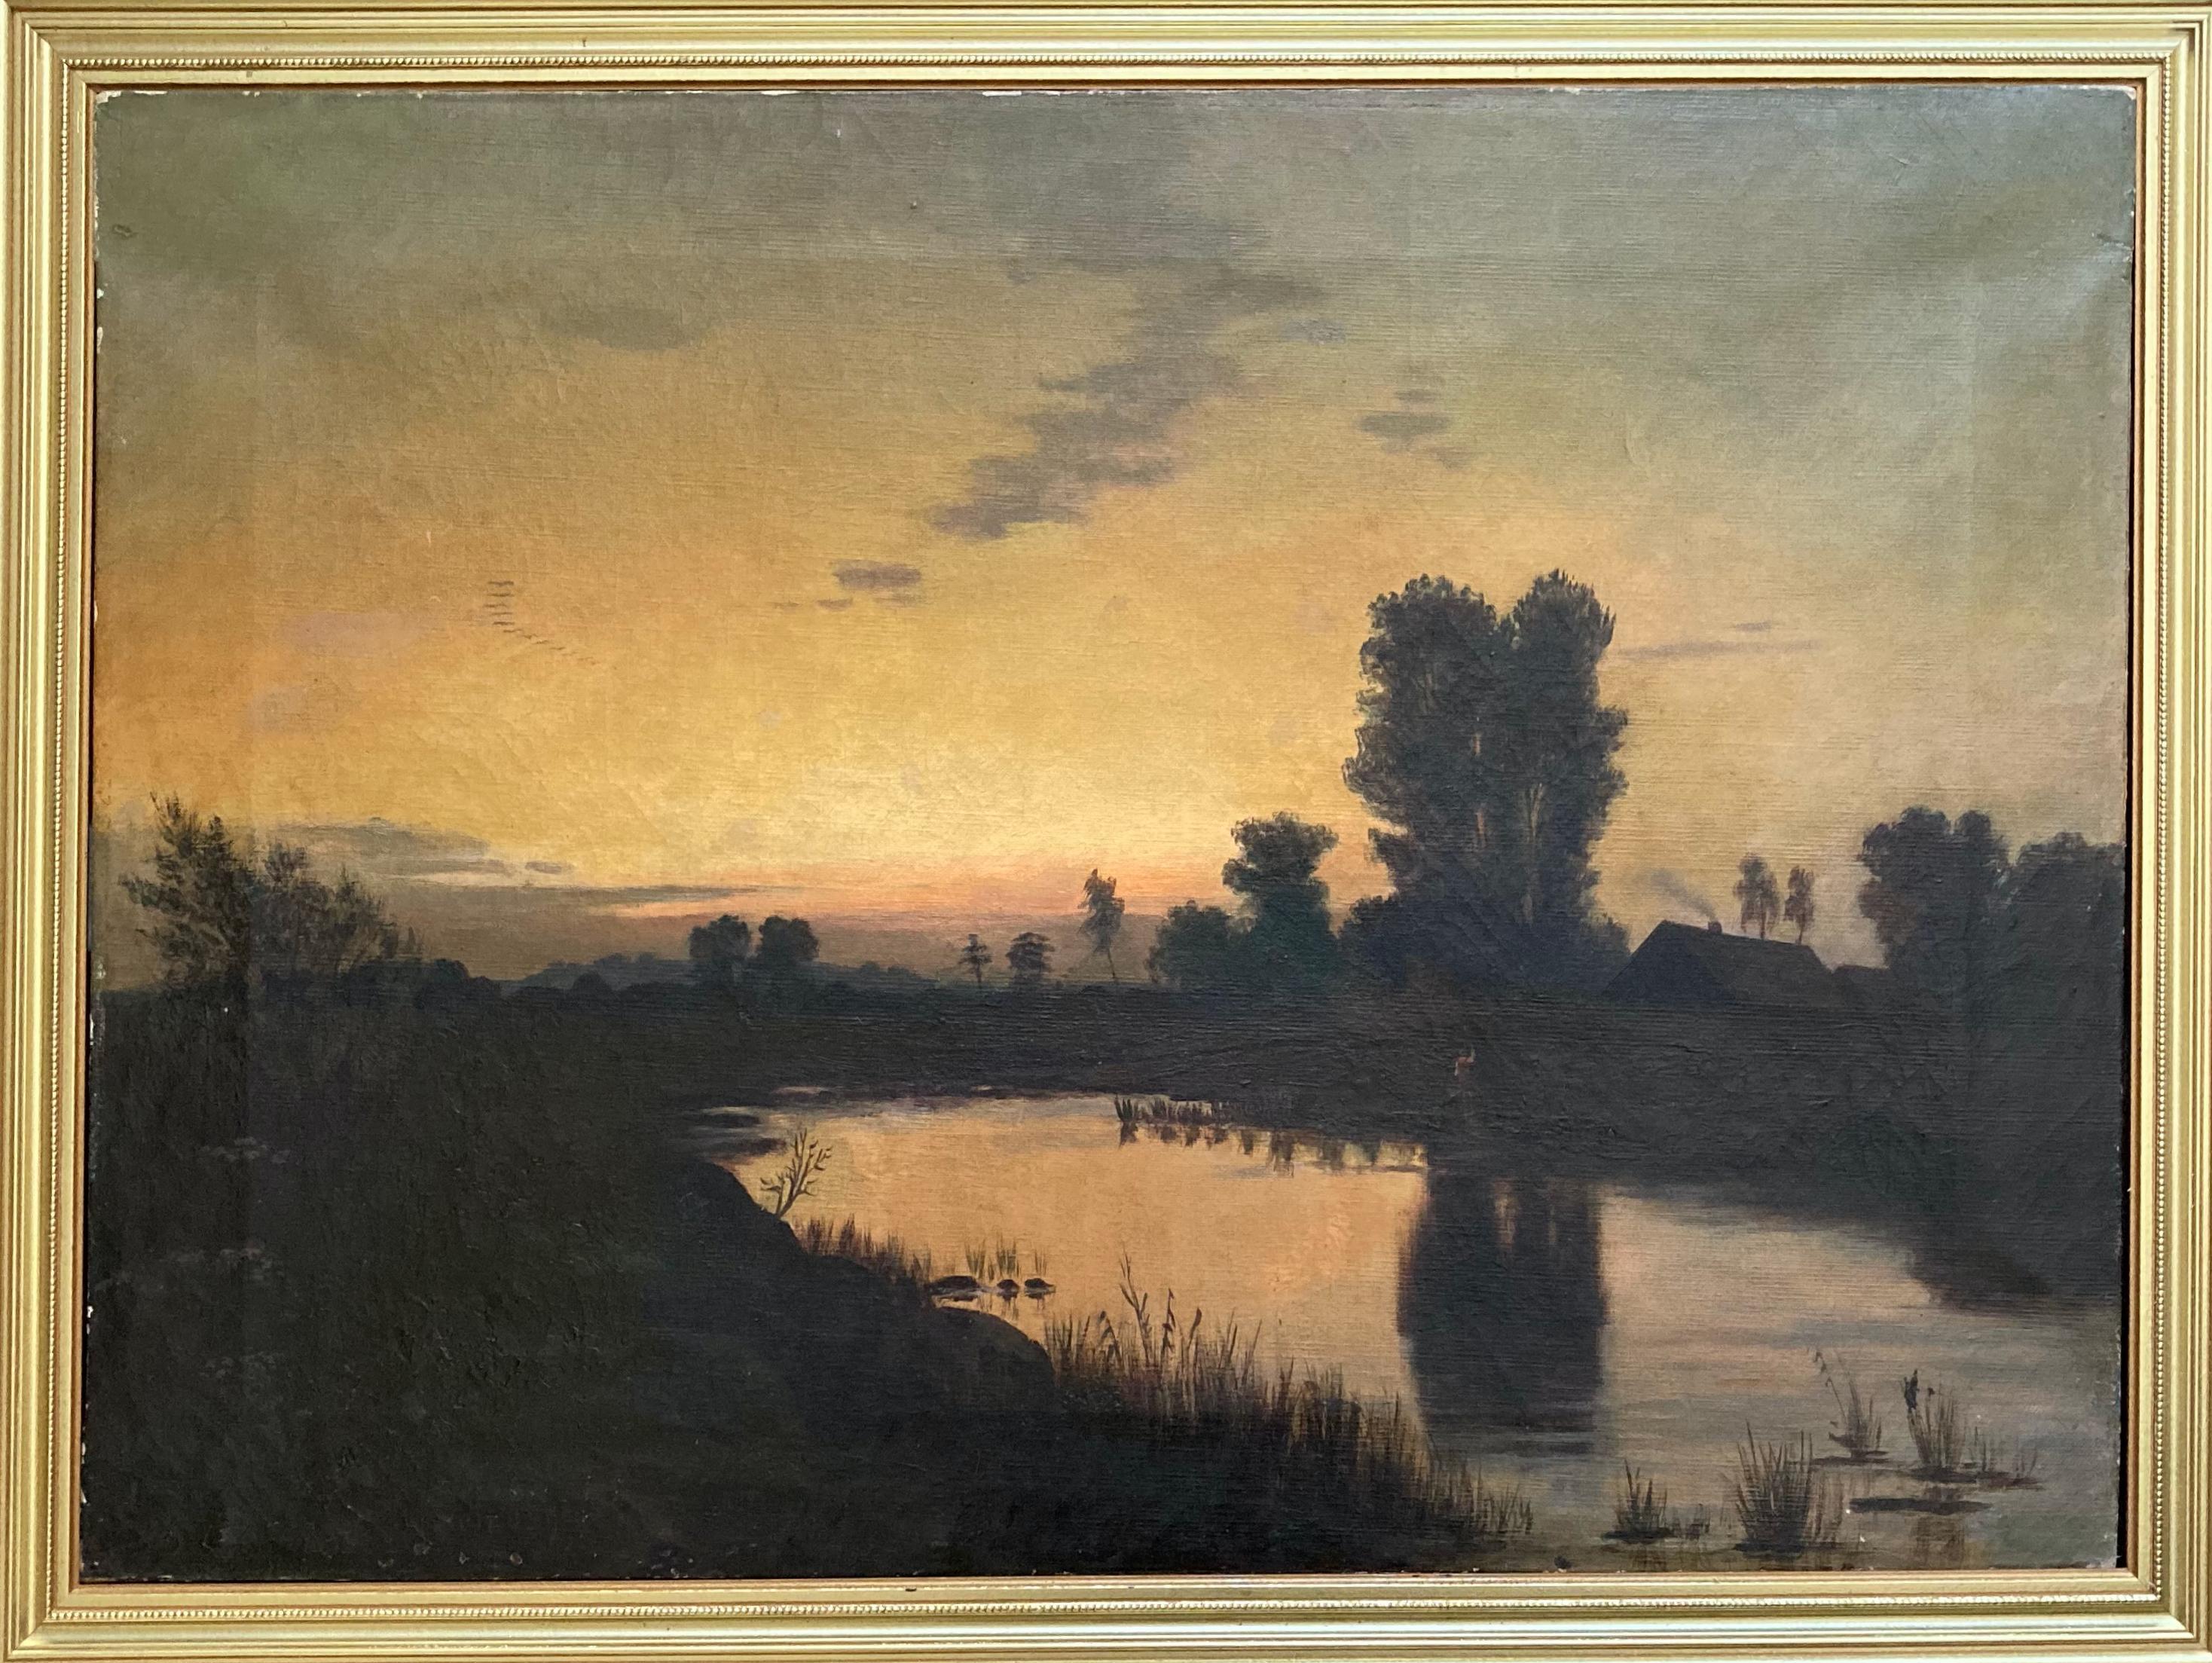 Unknown Landscape Painting - Cottage in the Country (Framed 19th-Century Antique Landscape Sunset Painting)